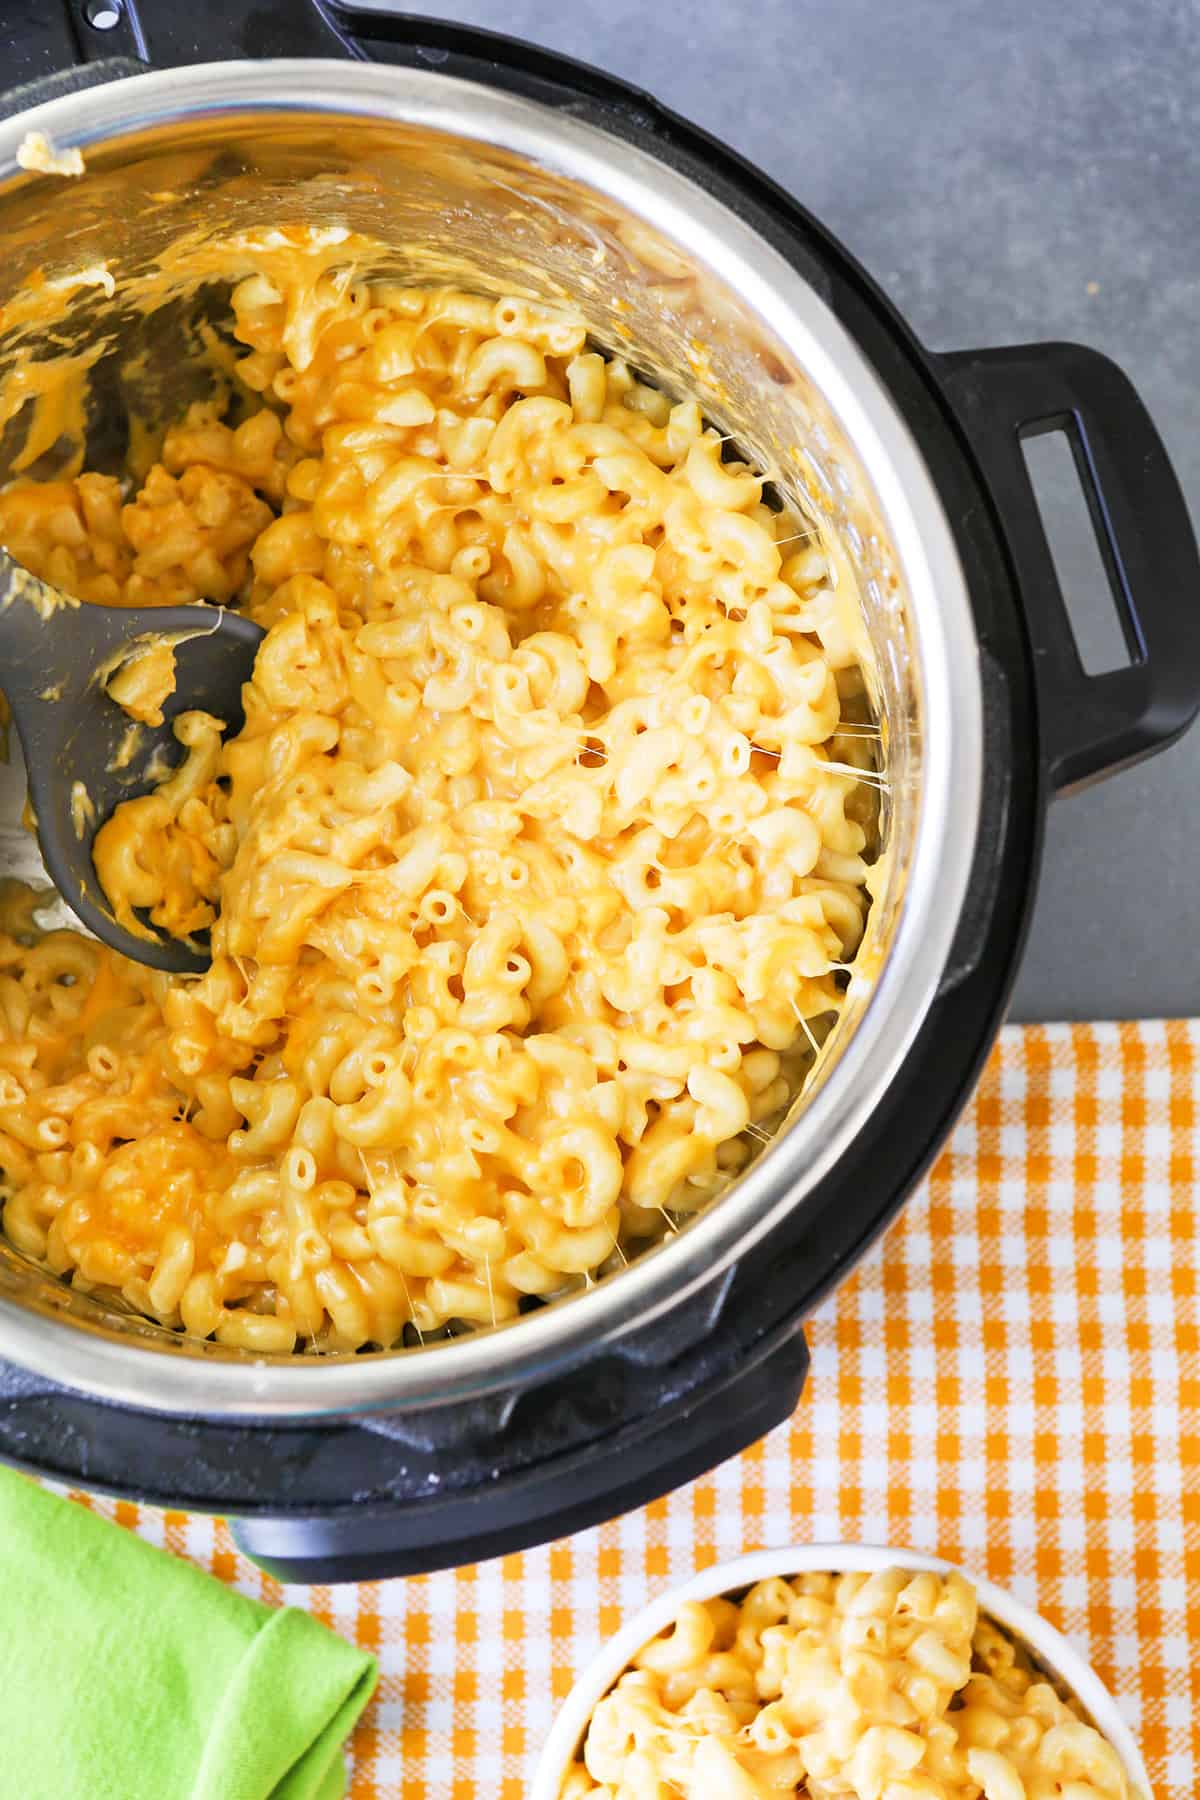 Instant Pot full of mac and cheese with bowl next to it.